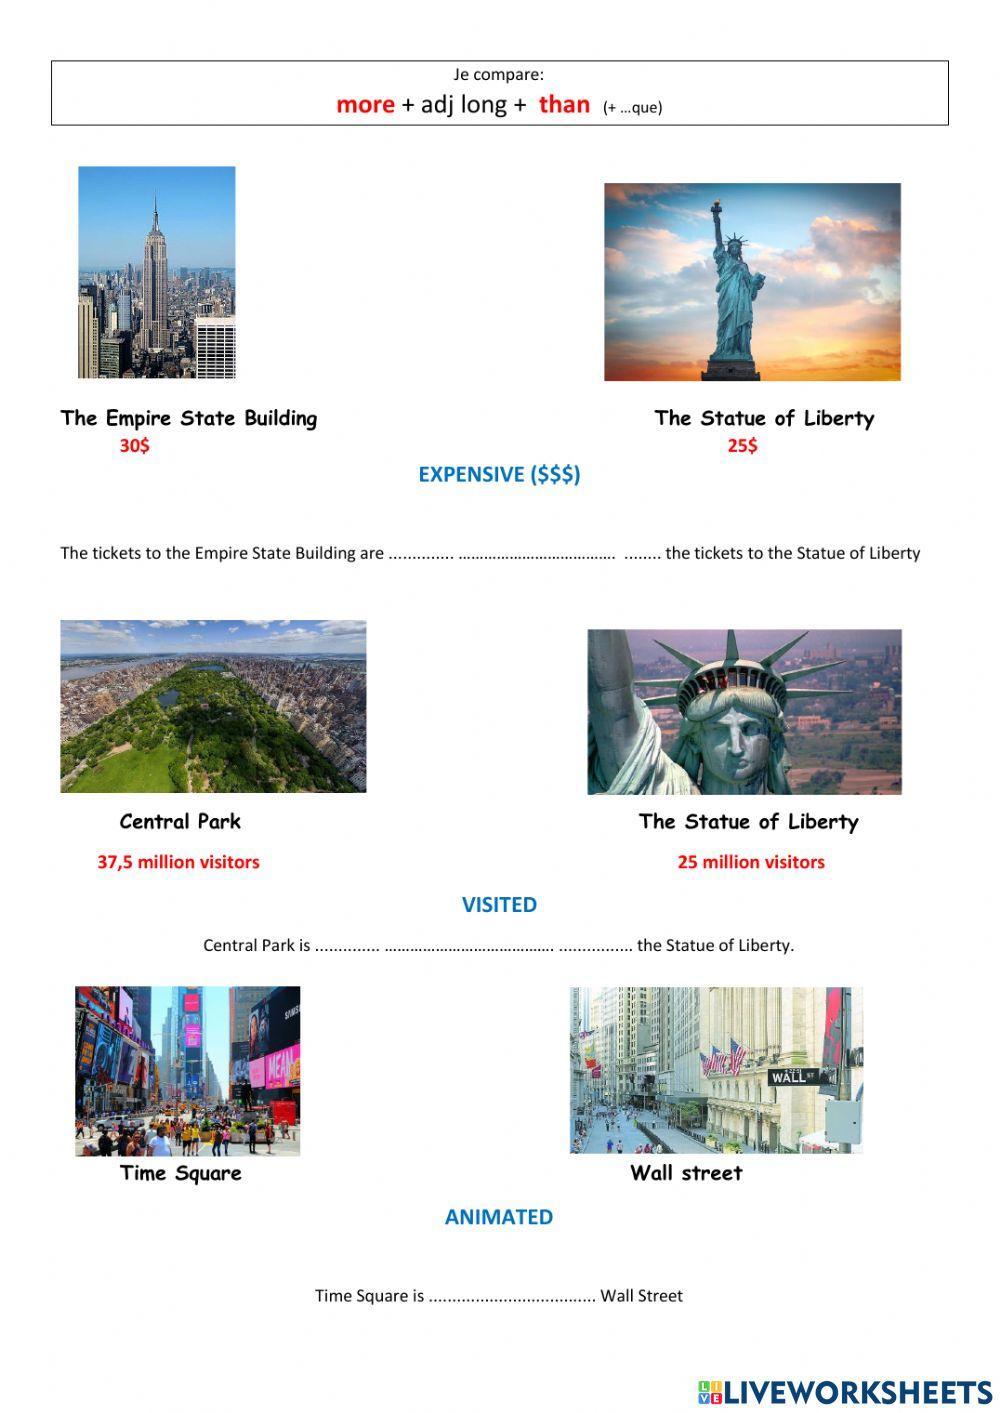 Comparing attractions in NYC